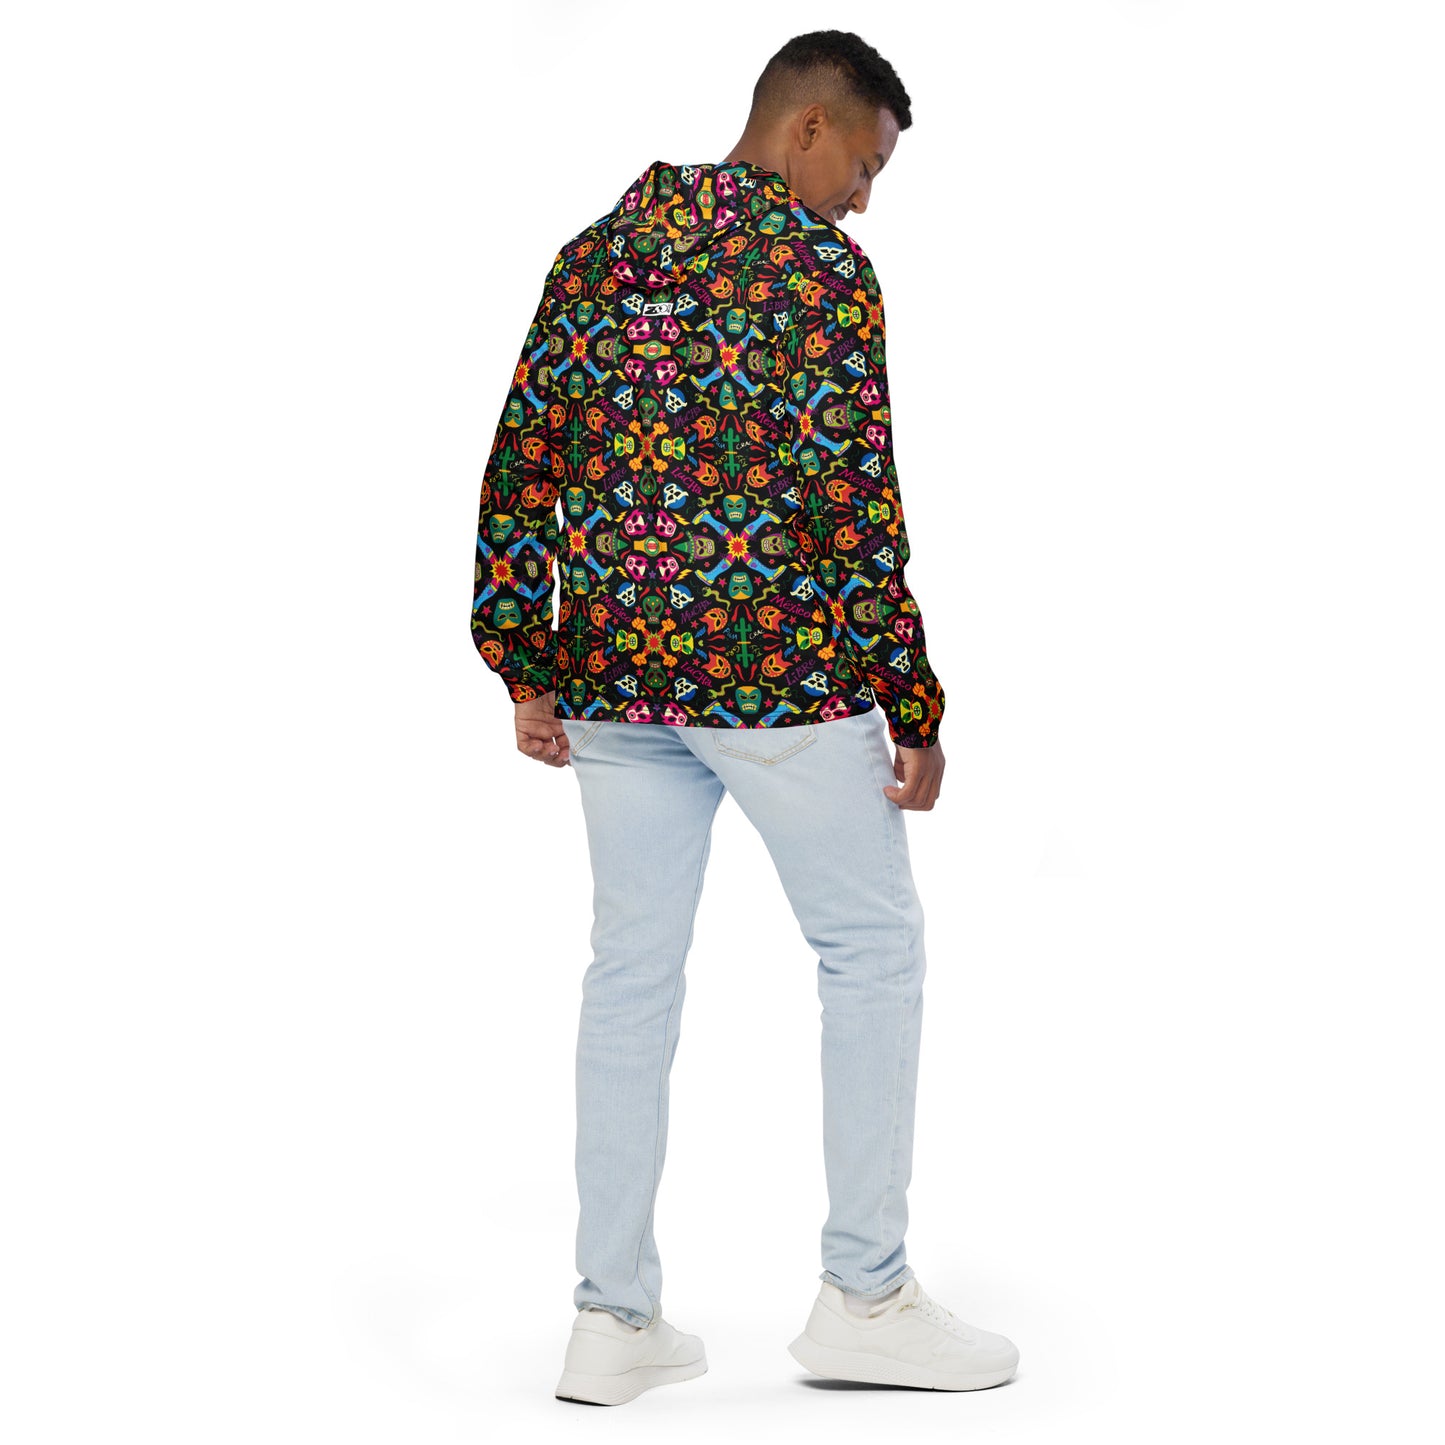 Mexican wrestling colorful party Men’s windbreaker. Back view